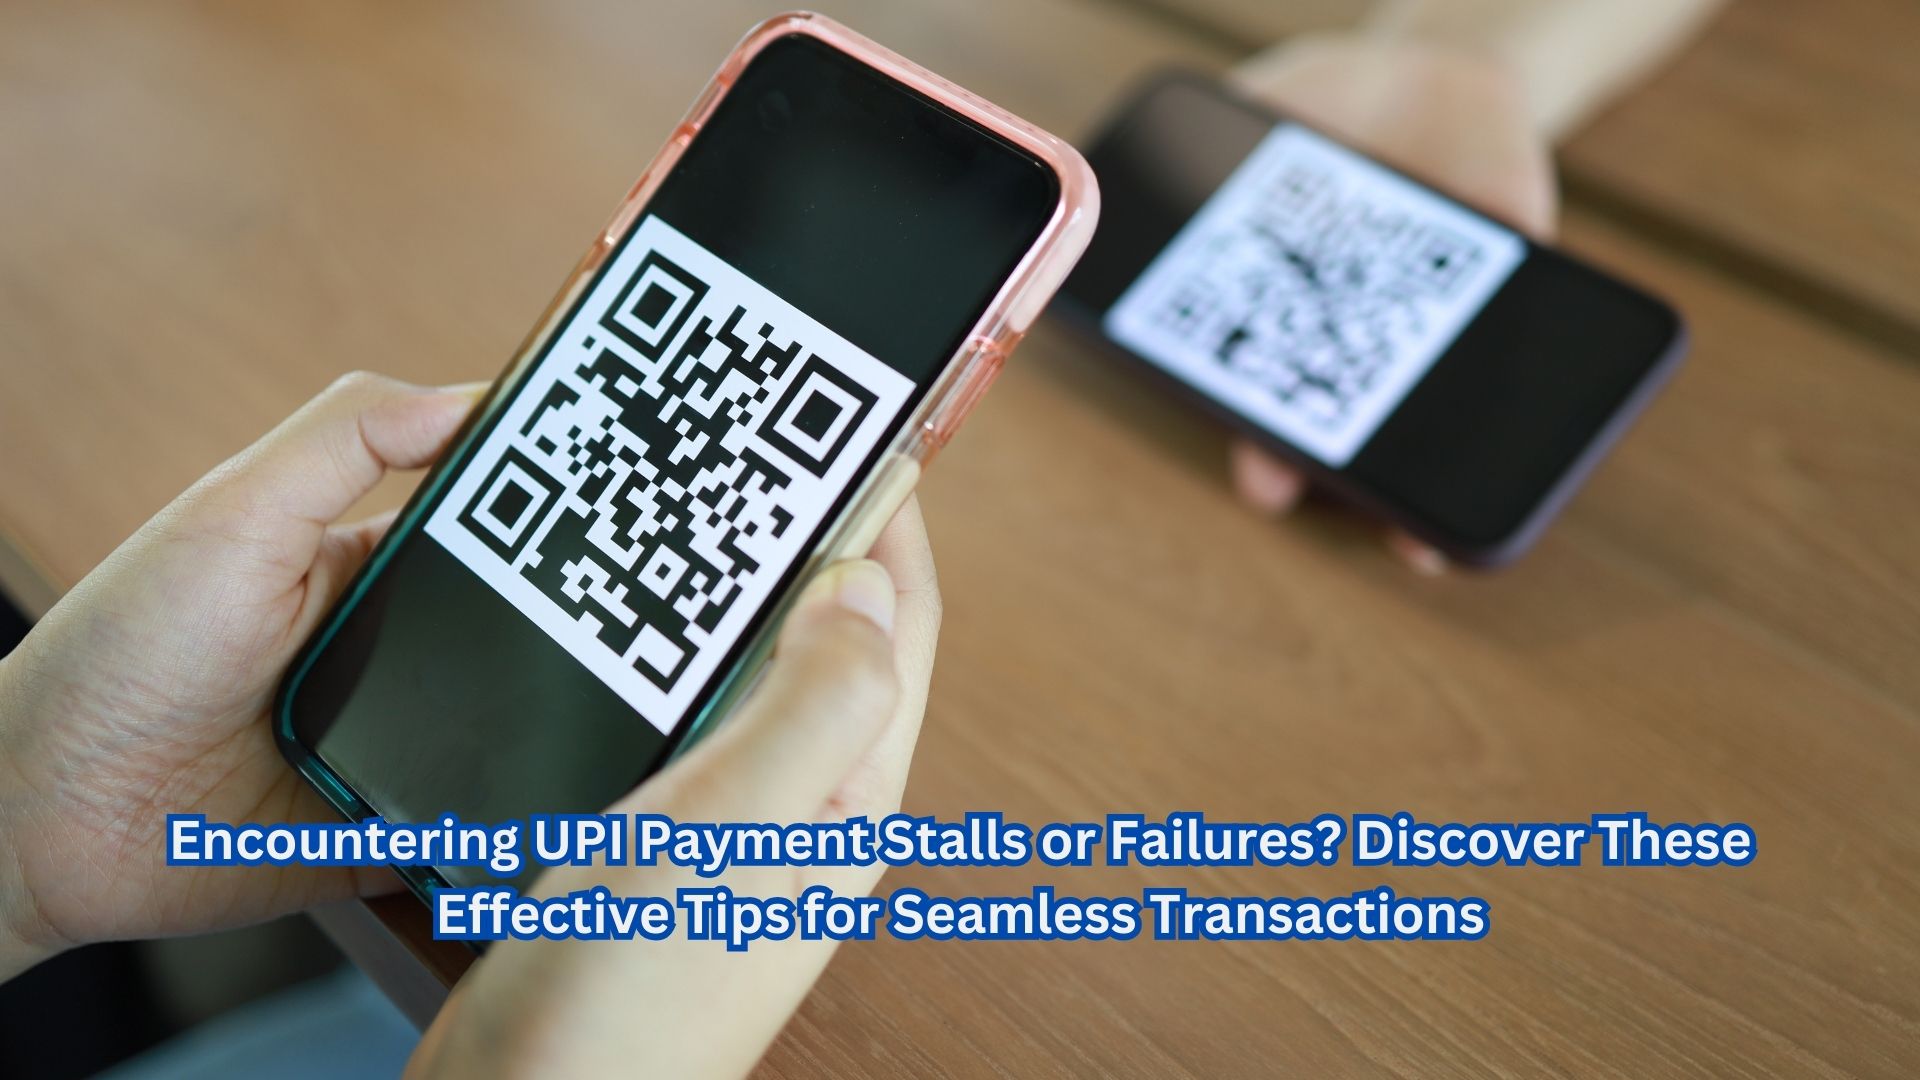 Encountering UPI Payment Stalls or Failures? Discover These Effective Tips for Seamless Transactions